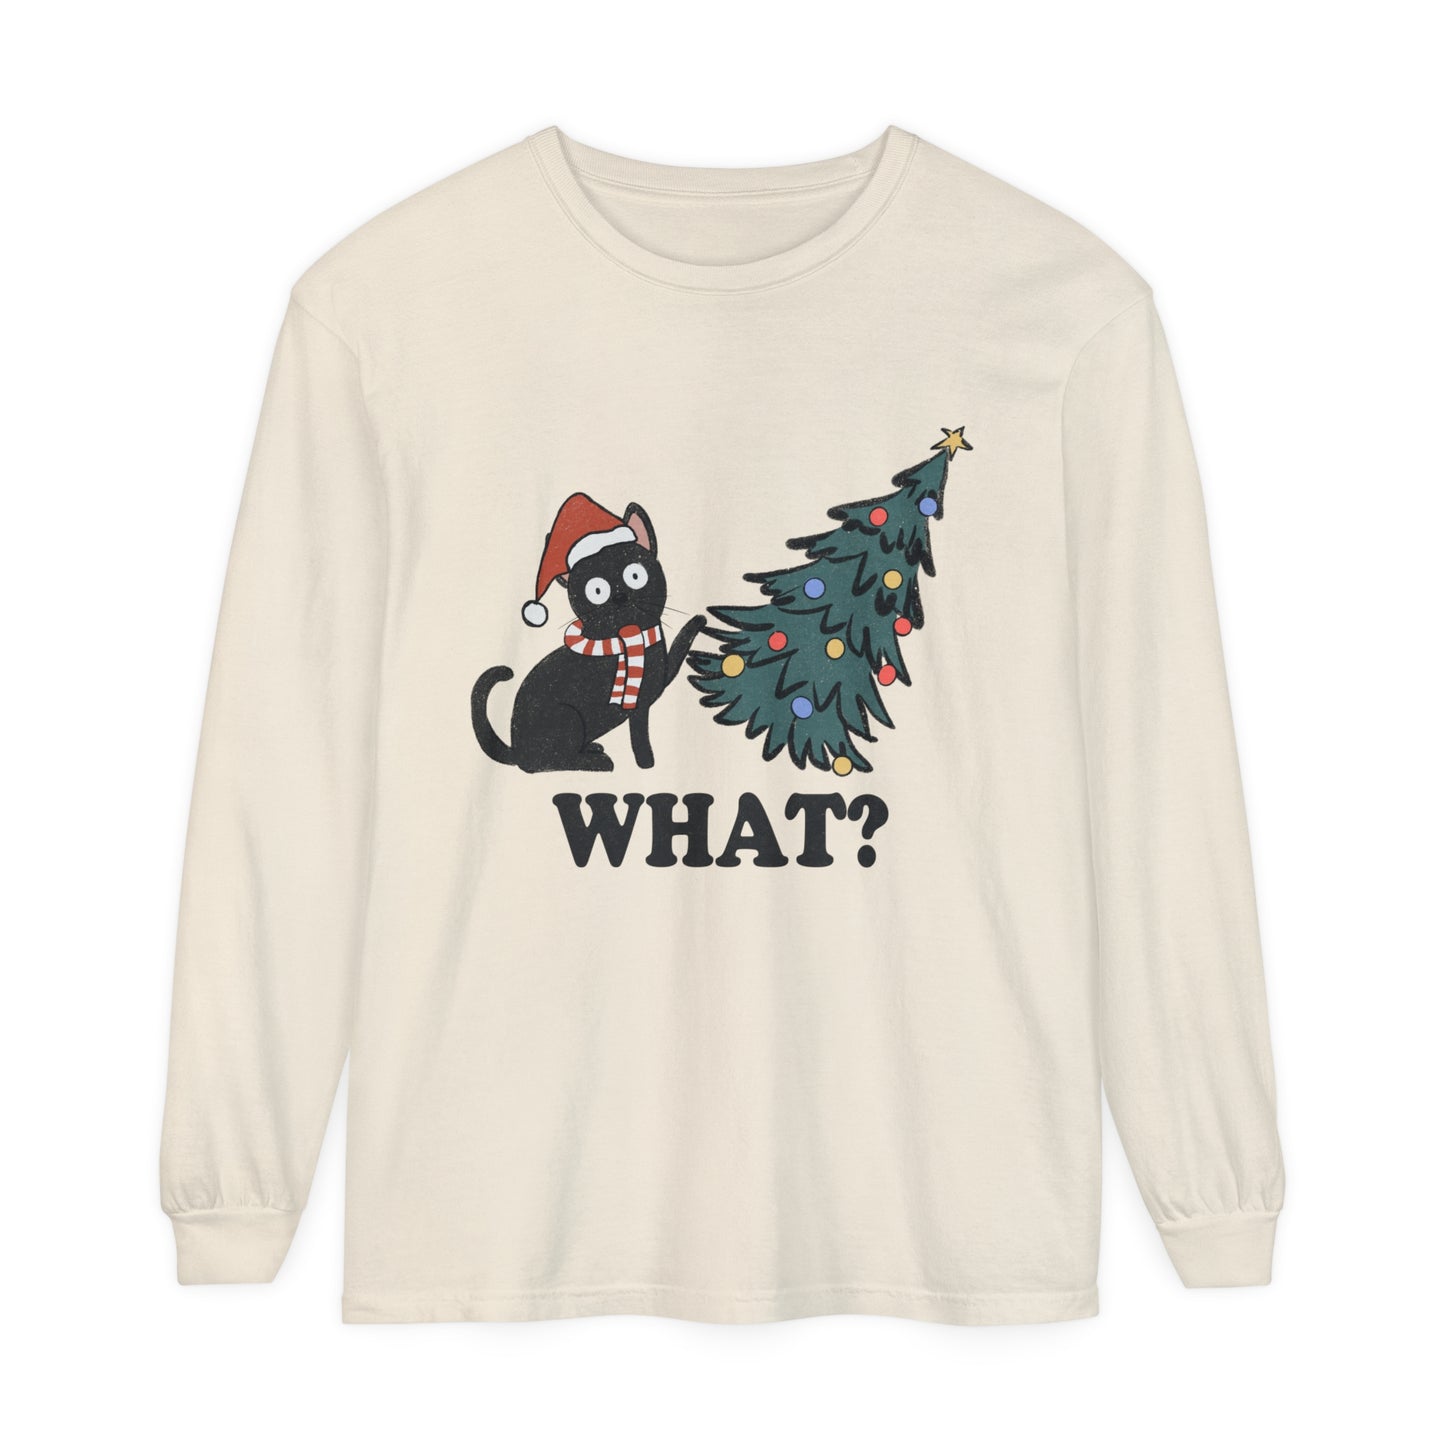 Funny Cat Christmas Tree Adult Unisex Holiday Loose Long Sleeve T-Shirt